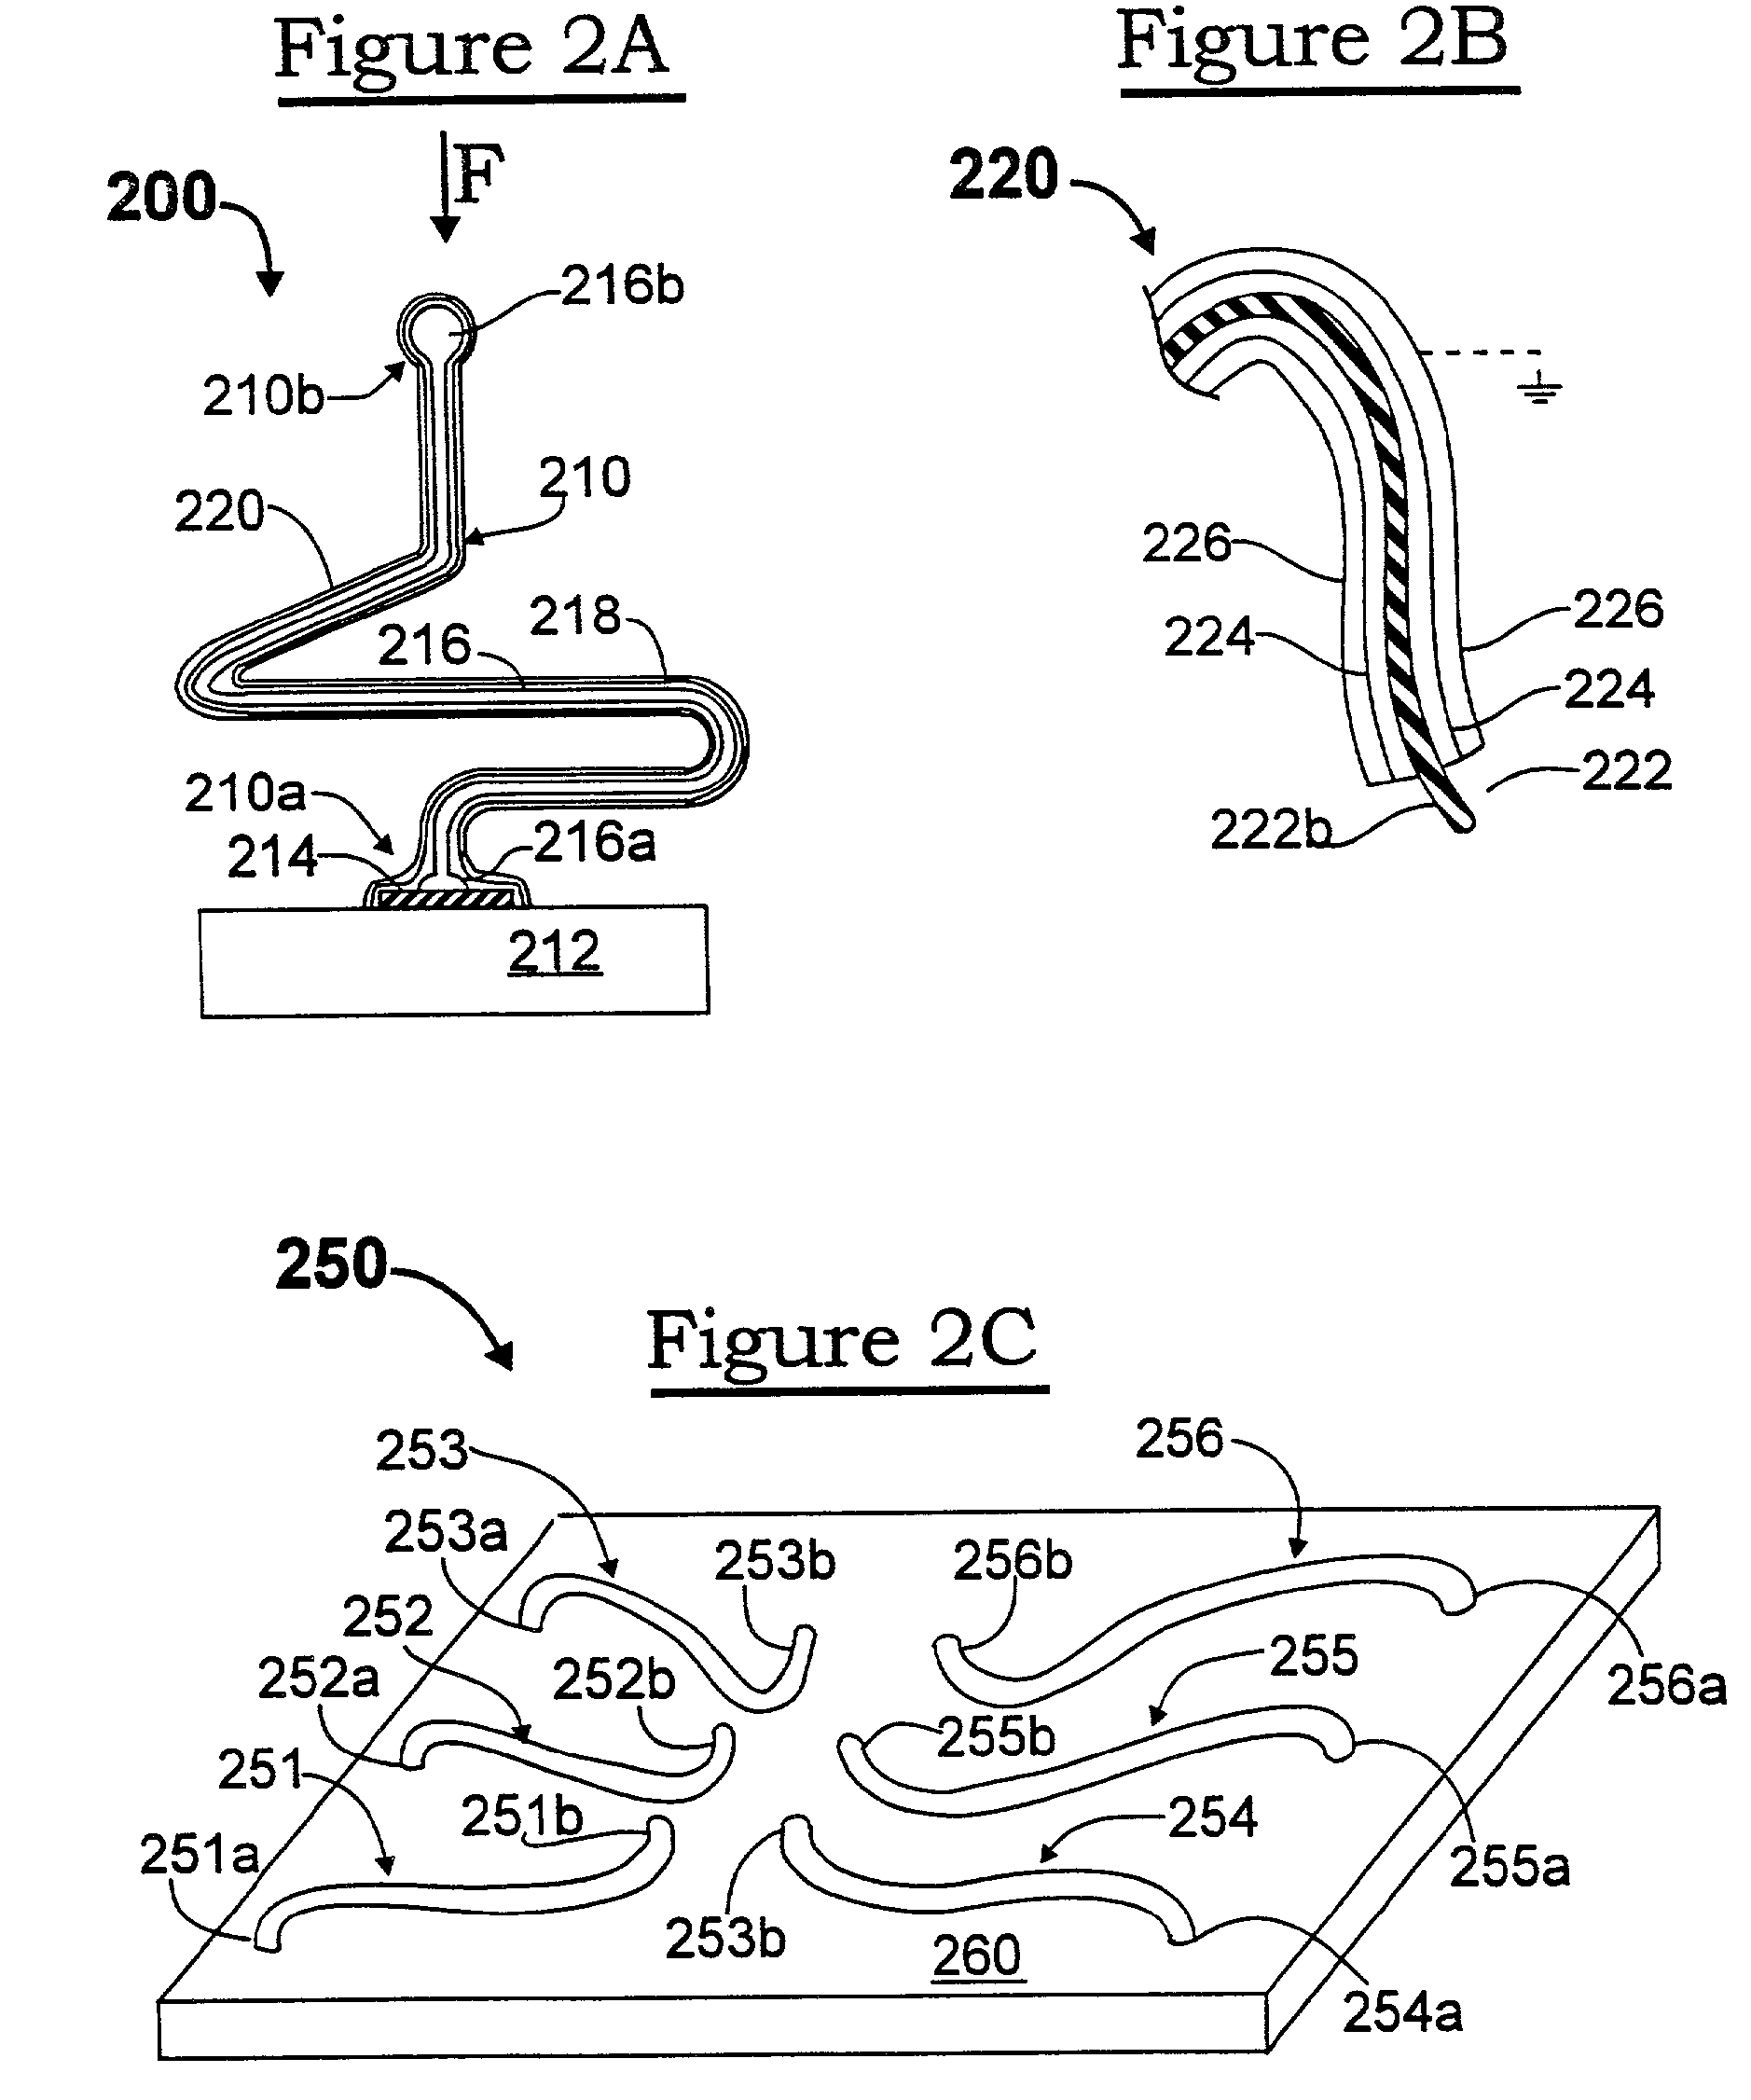 Probe card assembly and kit, and methods of making same